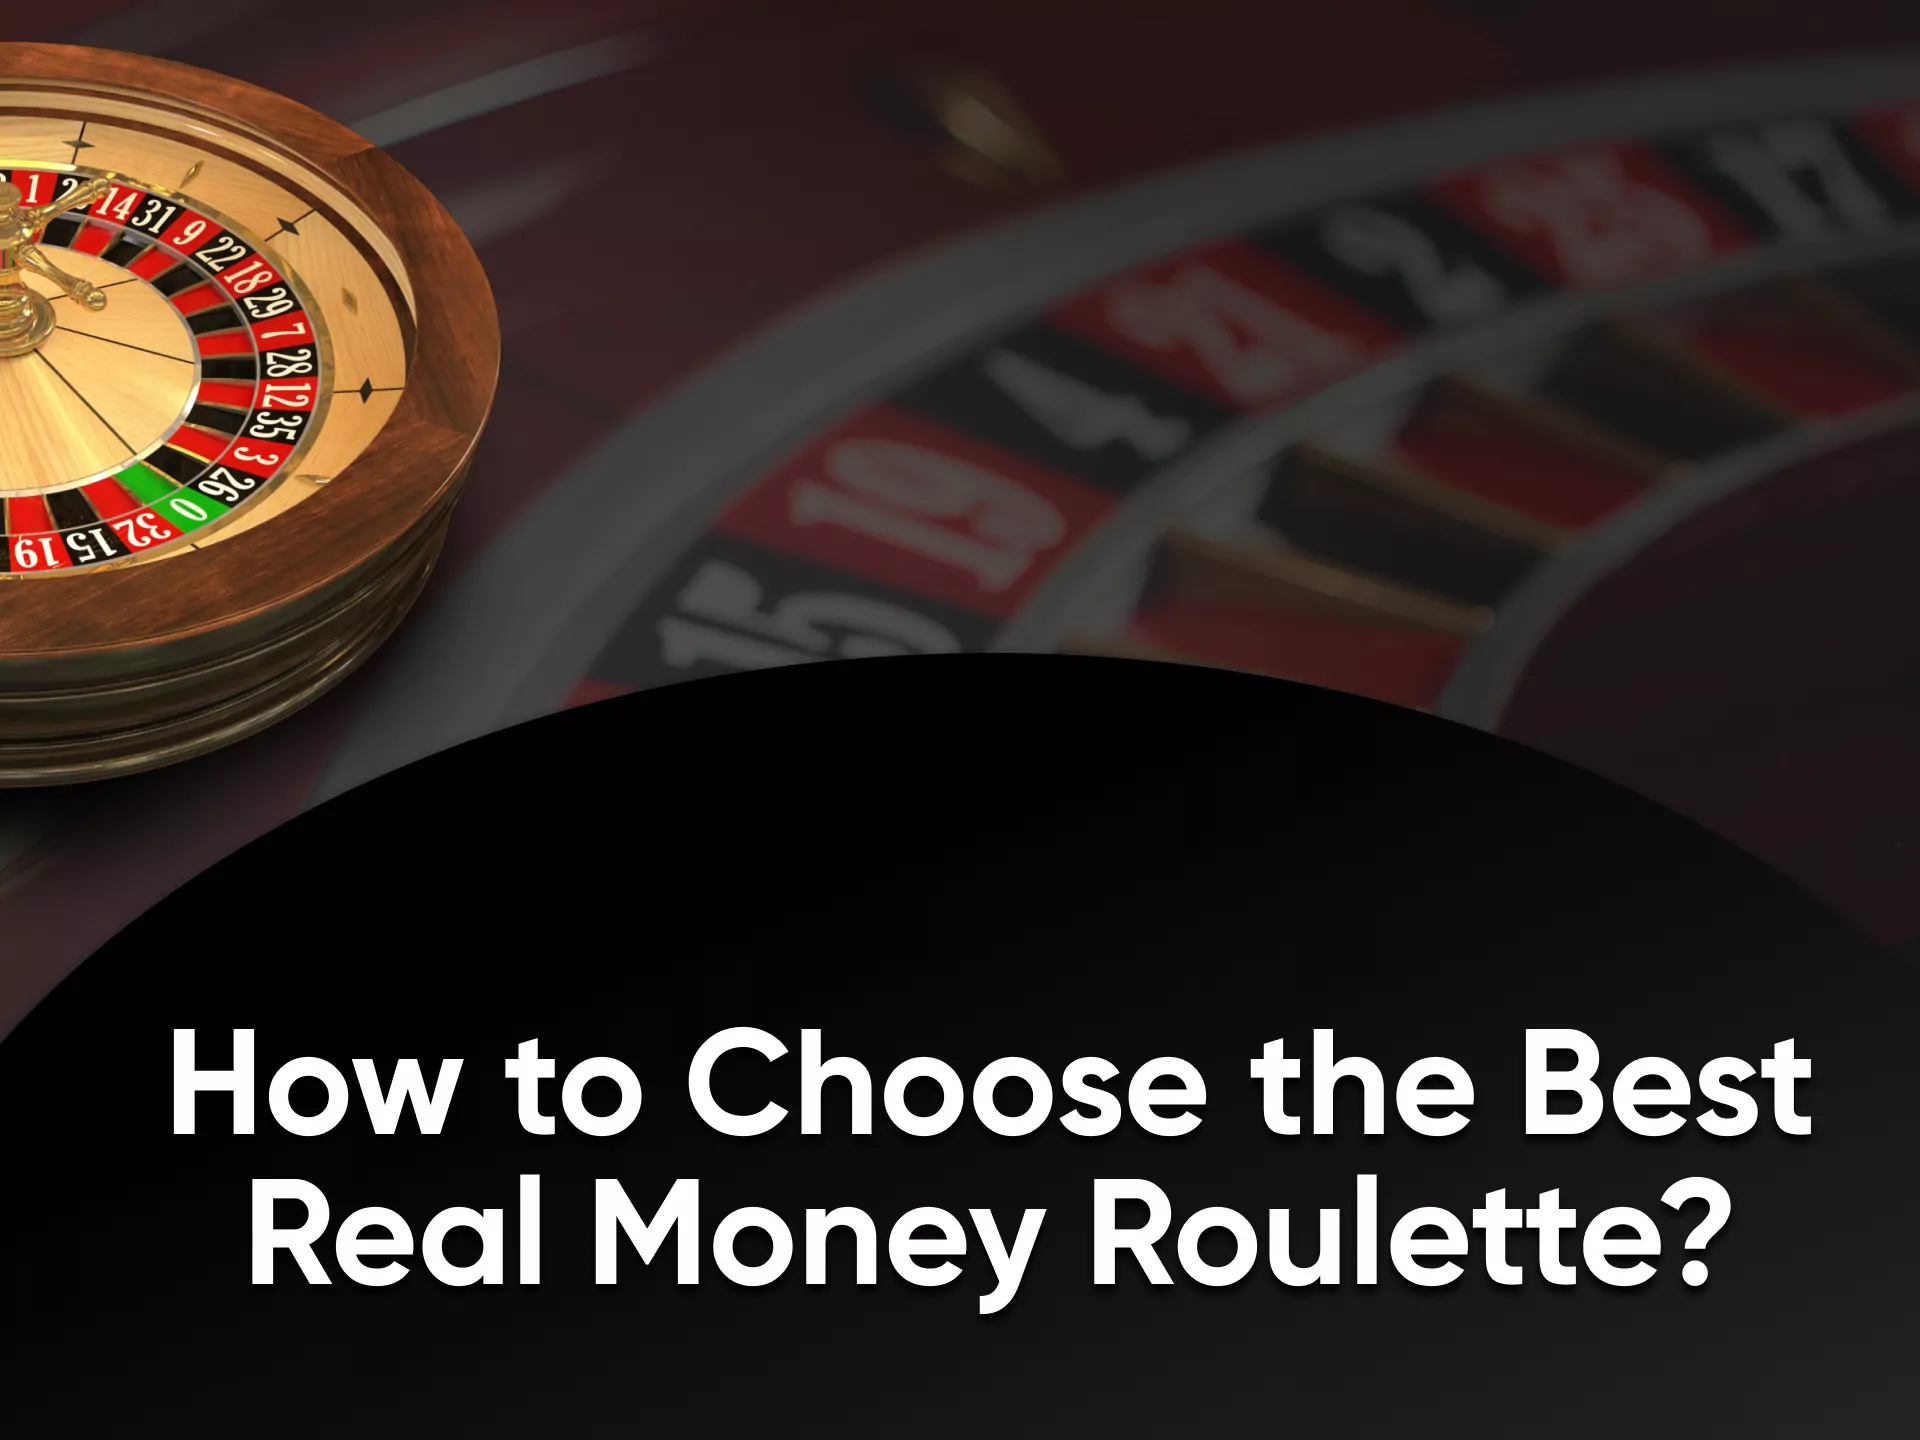 Make sure the service for playing online roulette is reliable.